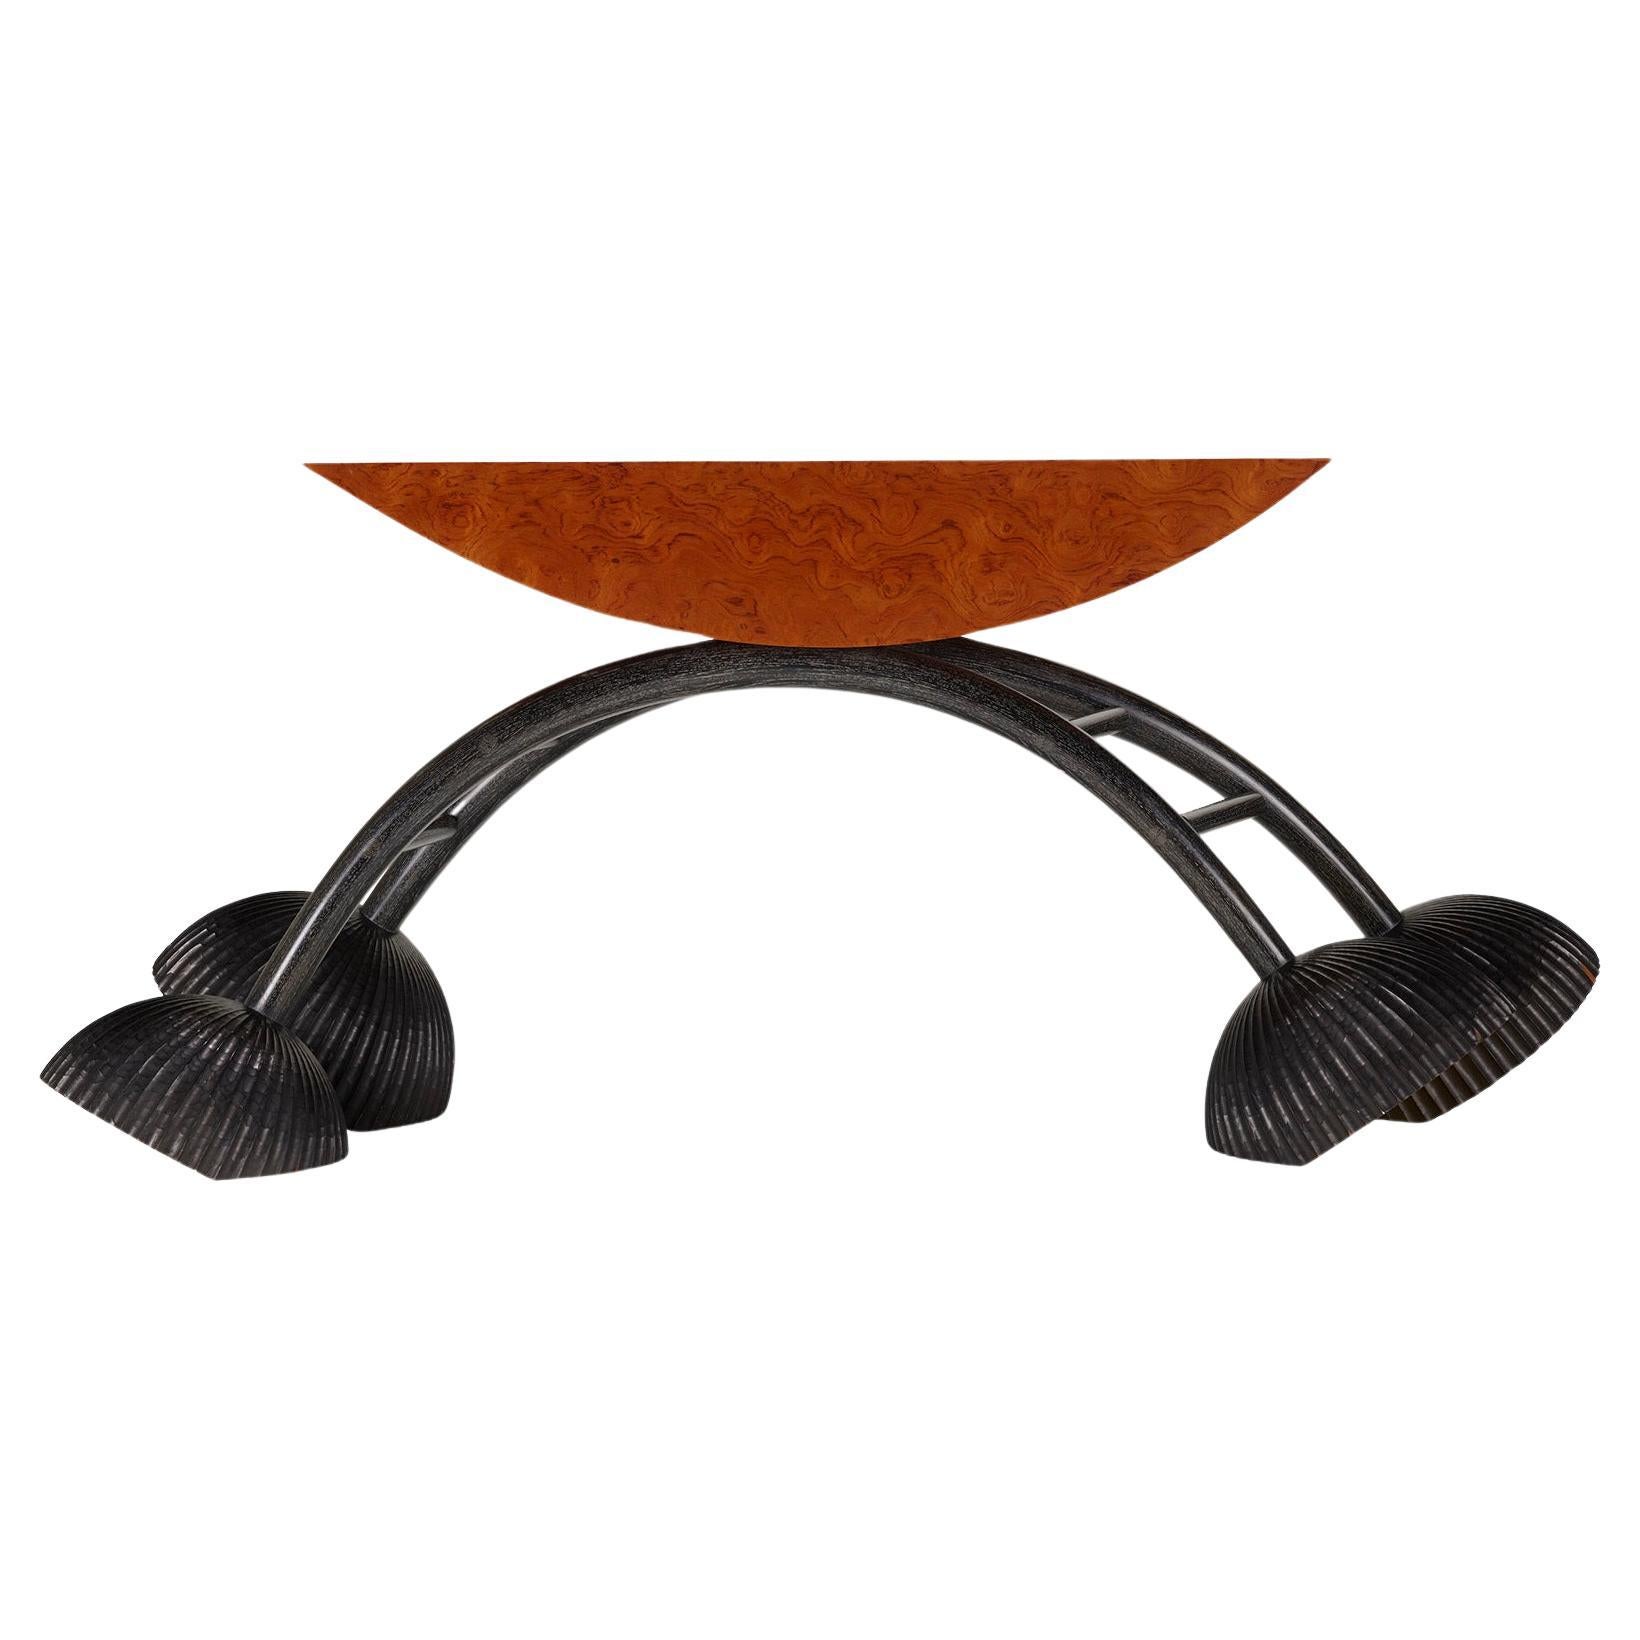 Whirlaway Table by Wendell Castle